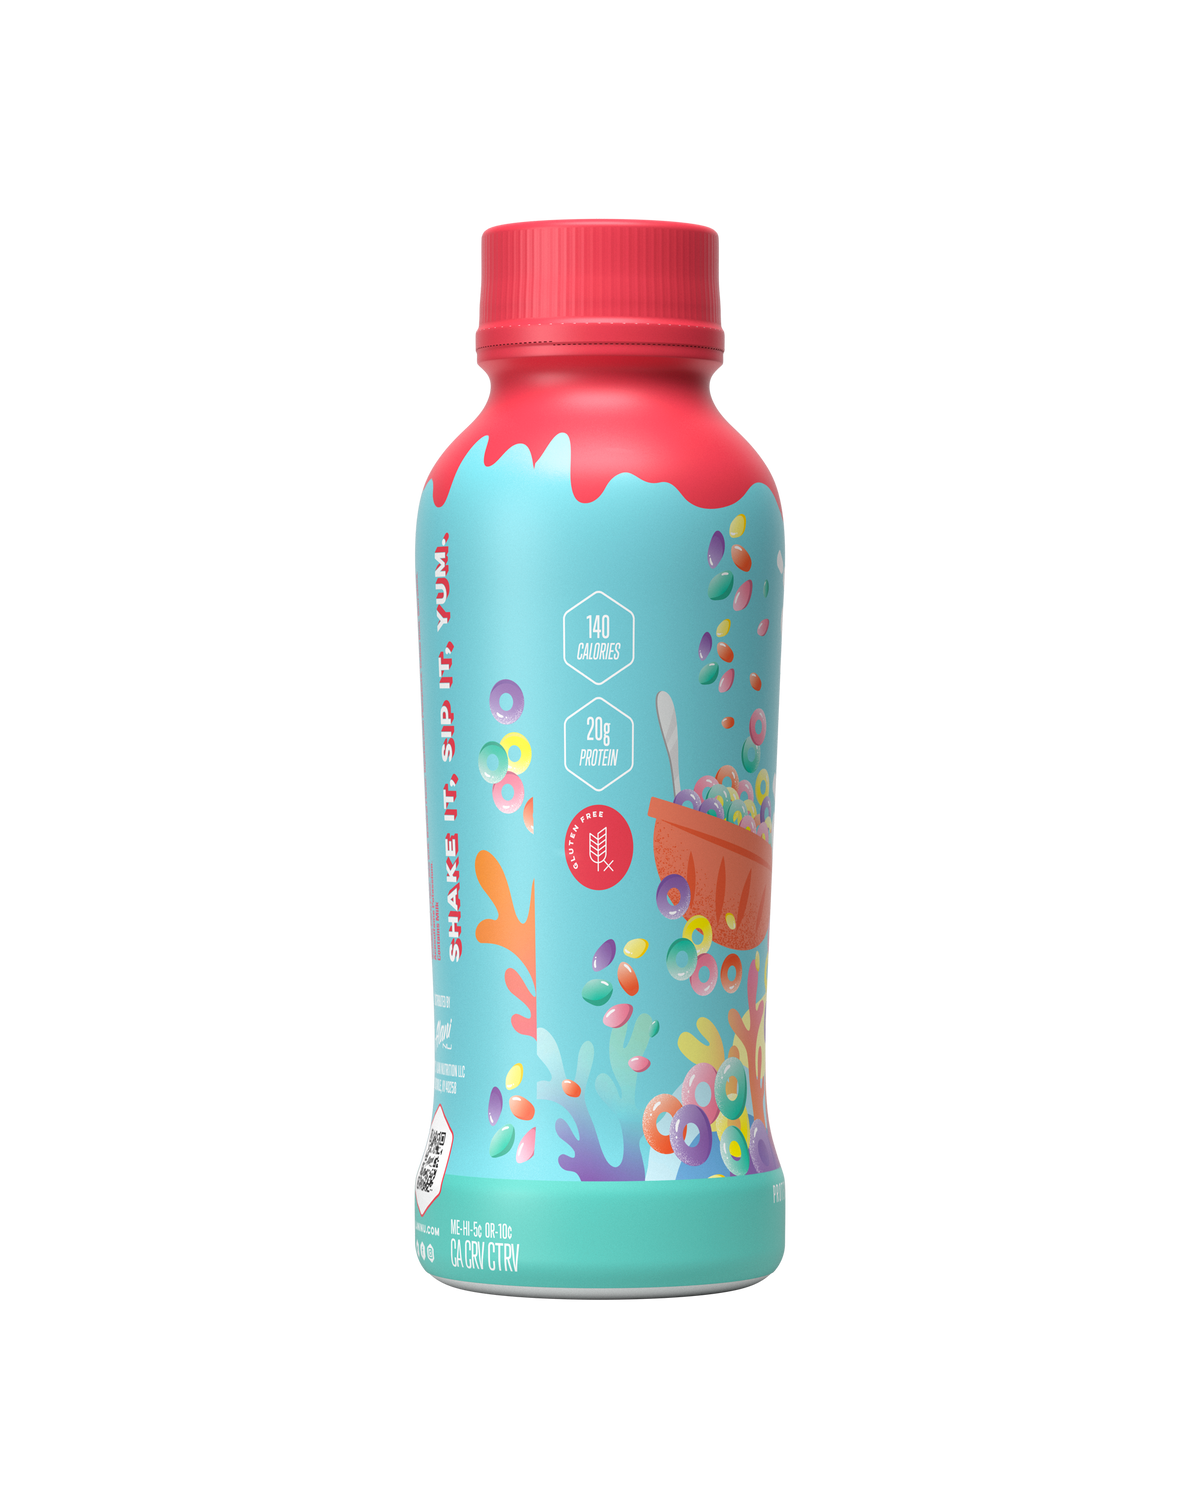  Alani Nu Protein Shake, Ready to Drink, Naturally Flavored,  Gluten Free, Only 140 Calories with 20g Protein per 12 Fl Oz bottle (Fruity  Cereal, 12 Pack) 1 : Grocery & Gourmet Food